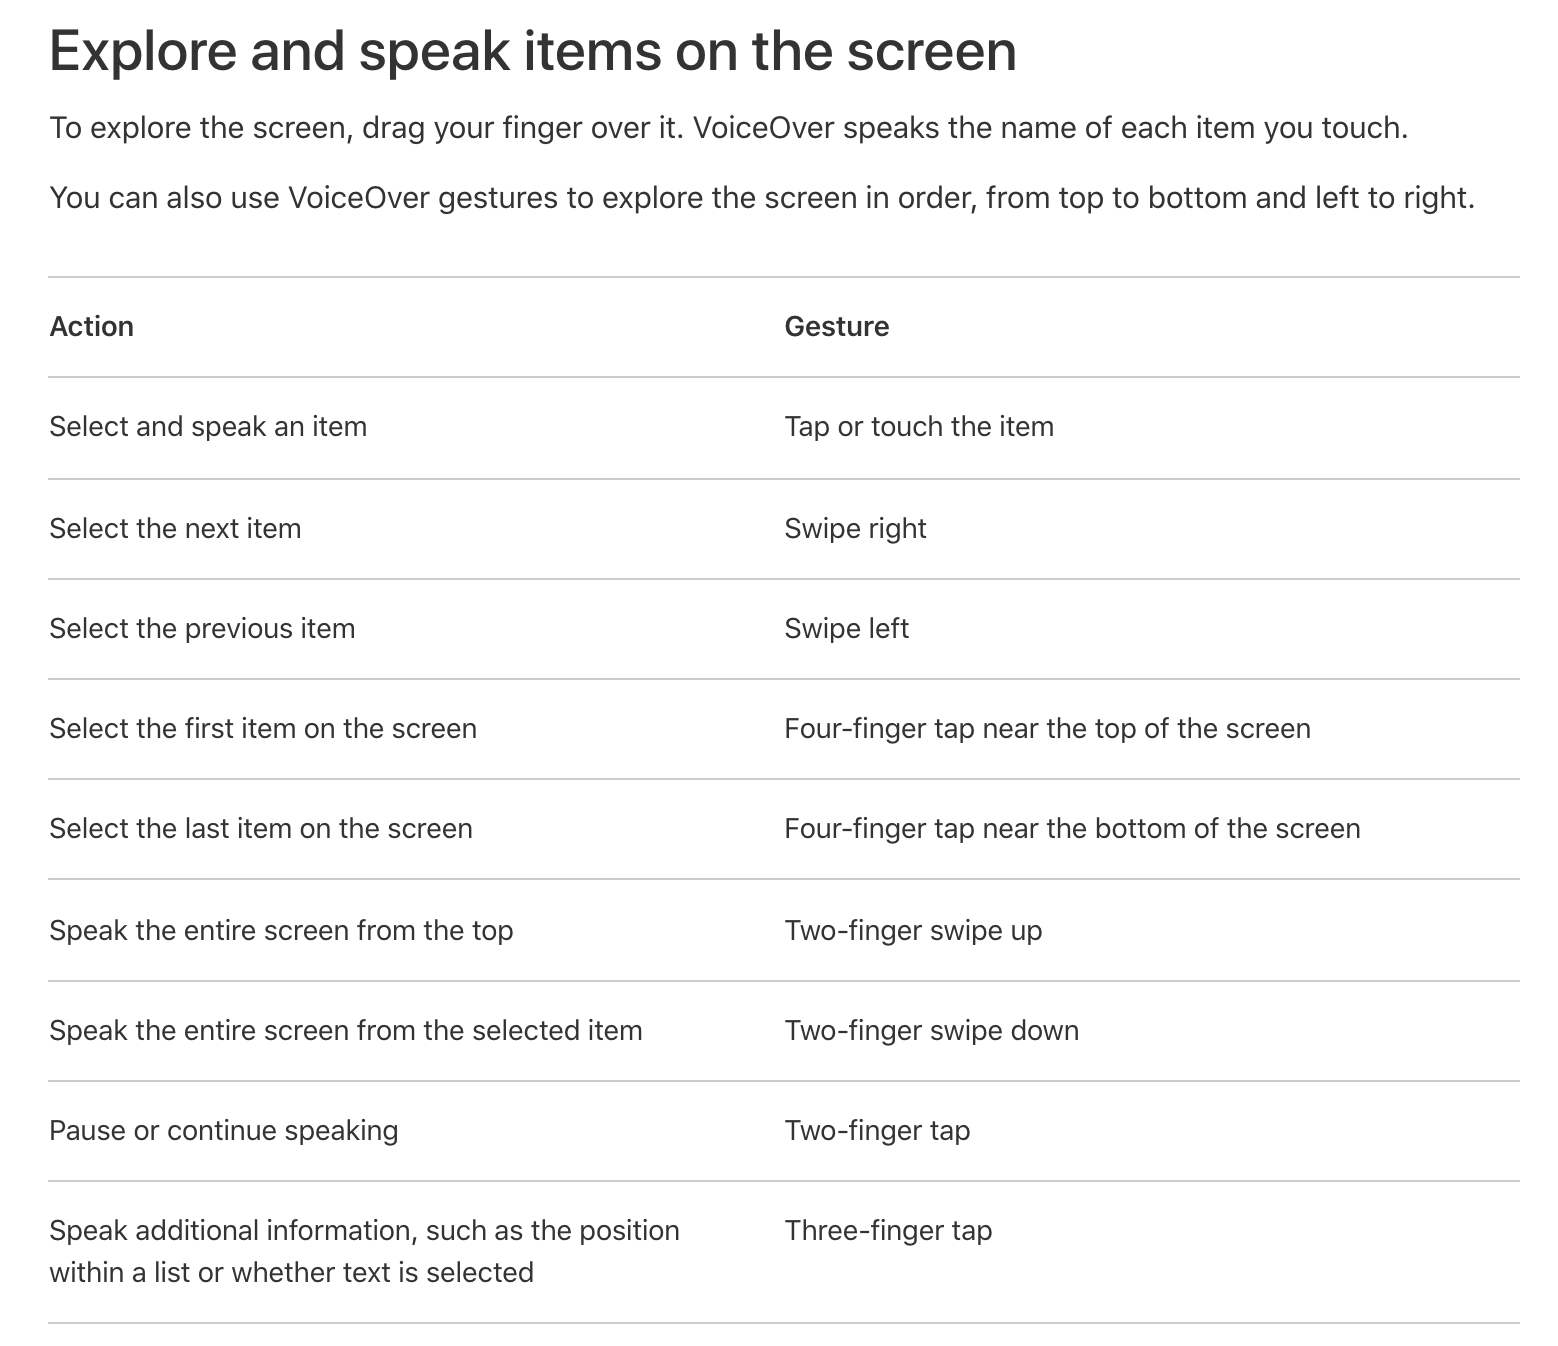 An image showing how you can explore and speak to the screen on iOS.